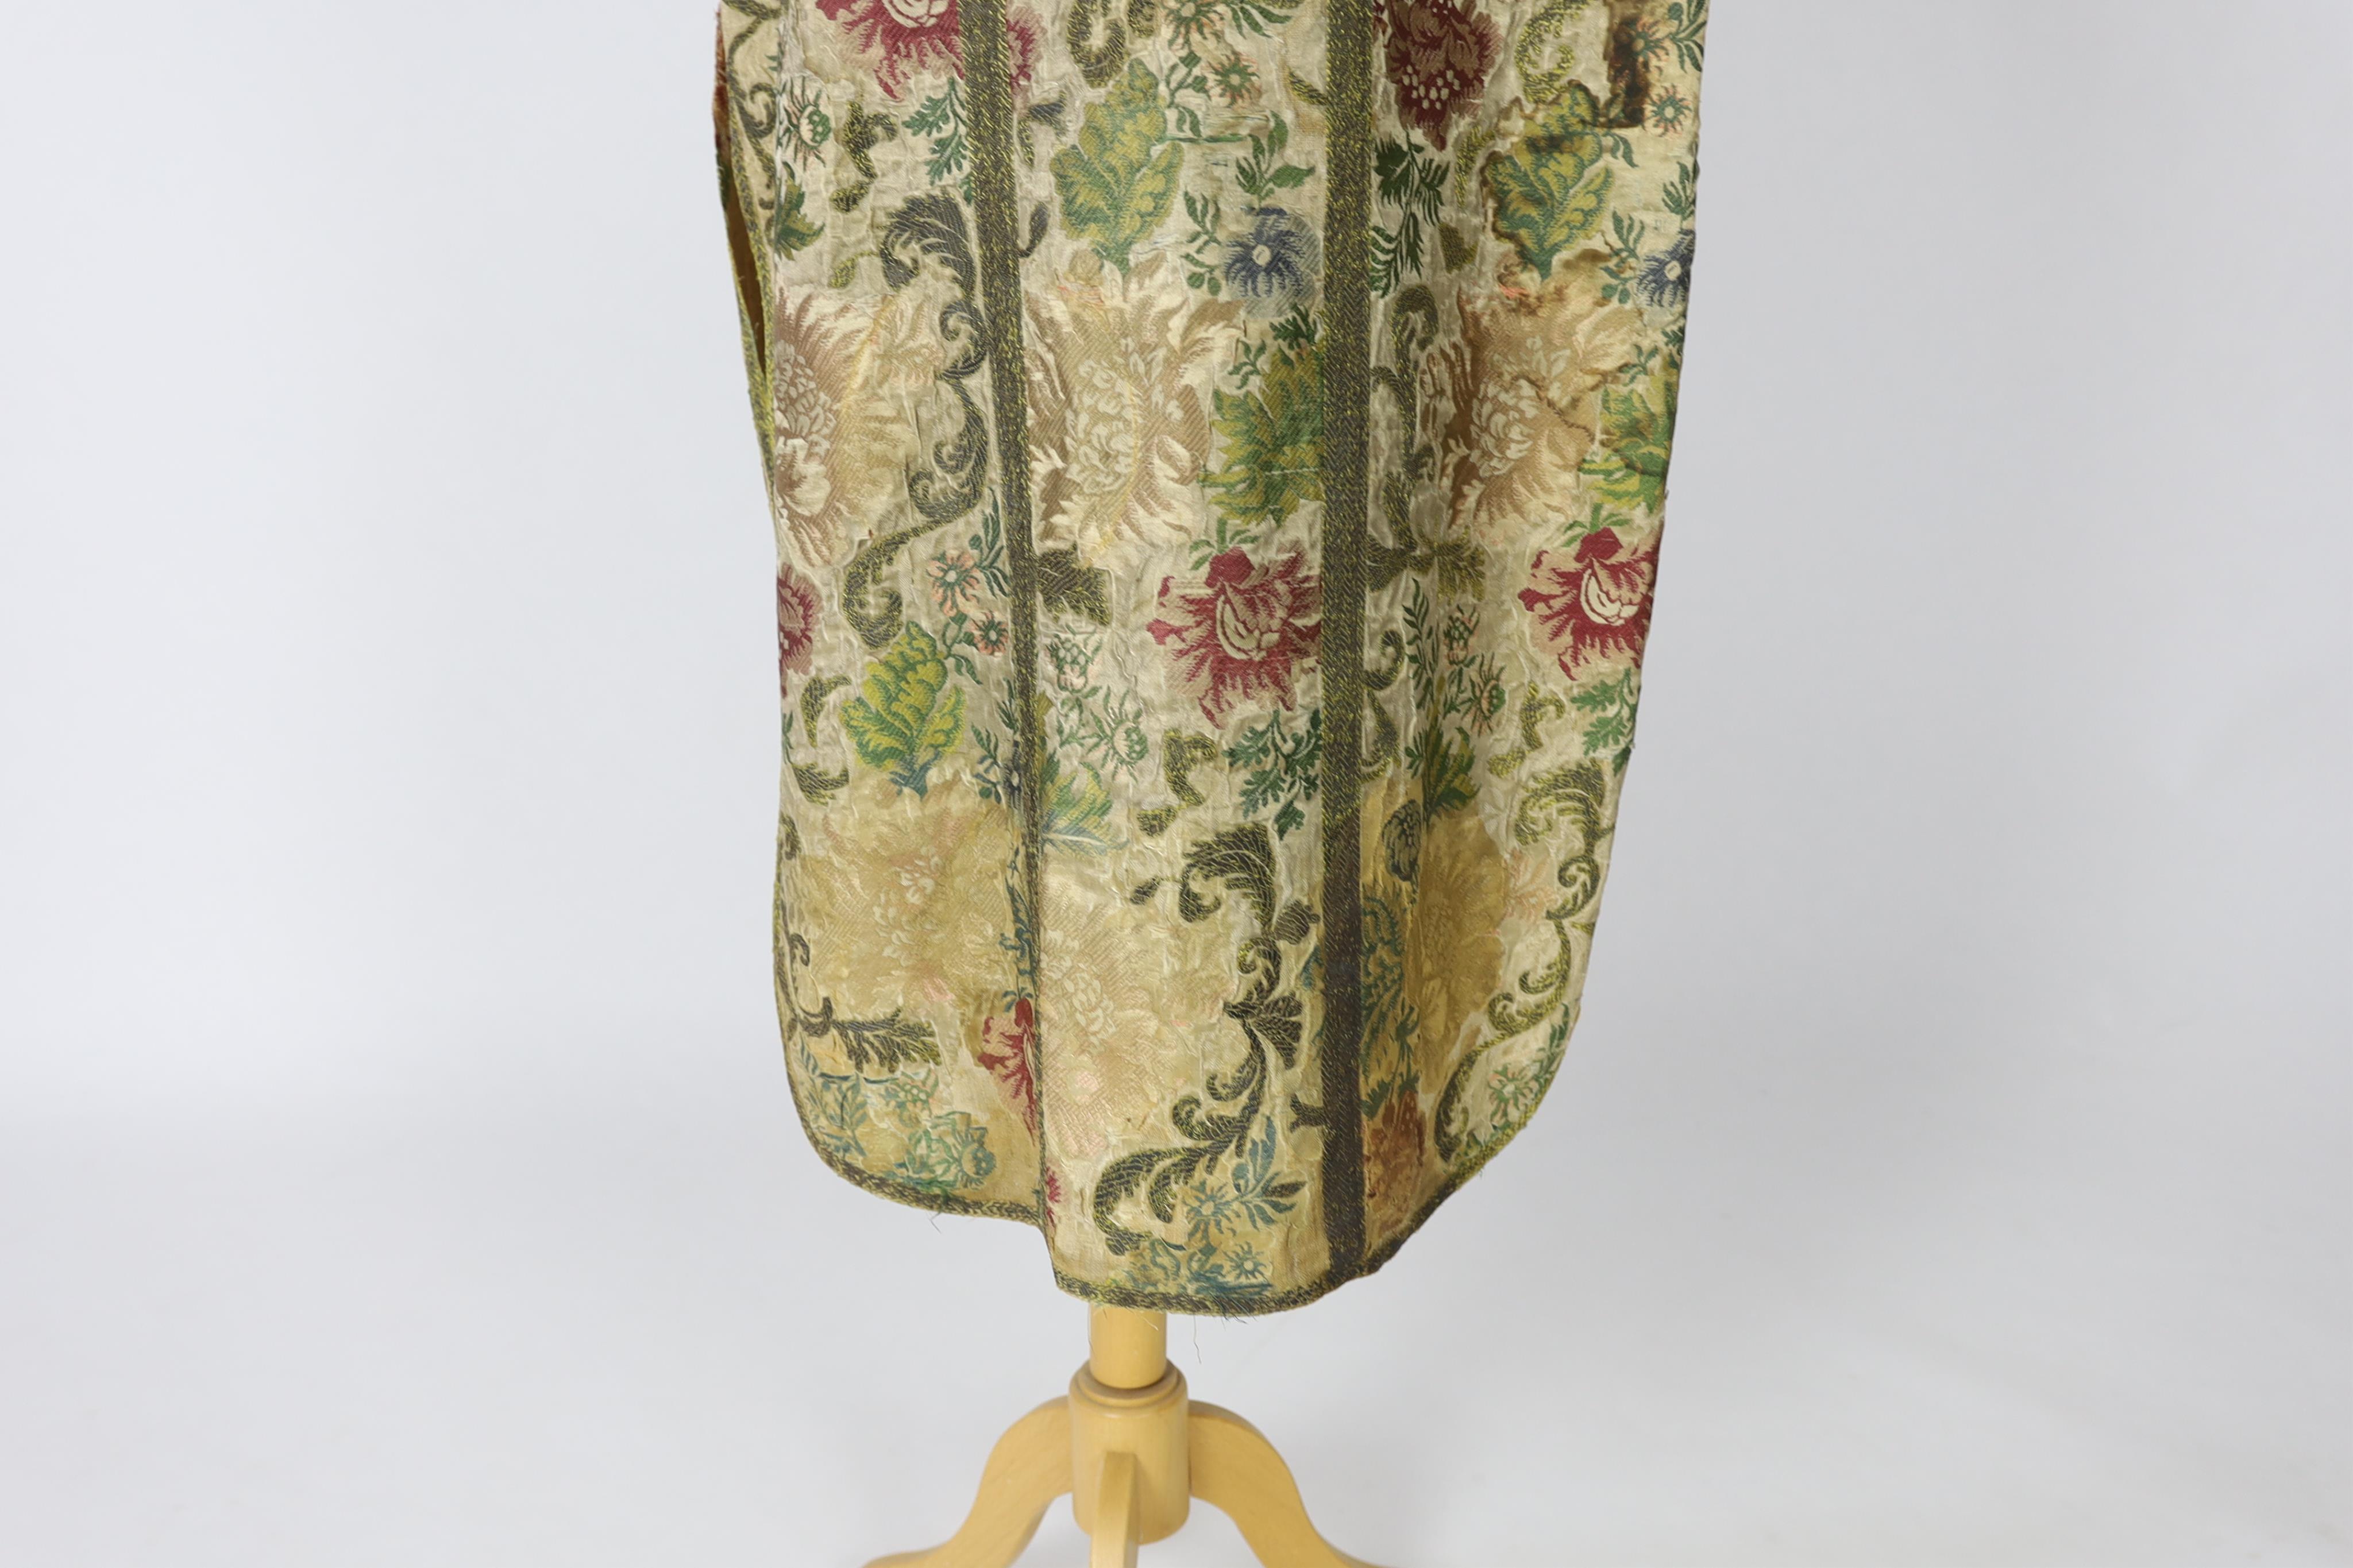 A late 18th century continental, possibly French, silk multi coloured and metallic brocade chasuble, lined with thick linen, edged and panelled with a thick metallic braid, 99cm long